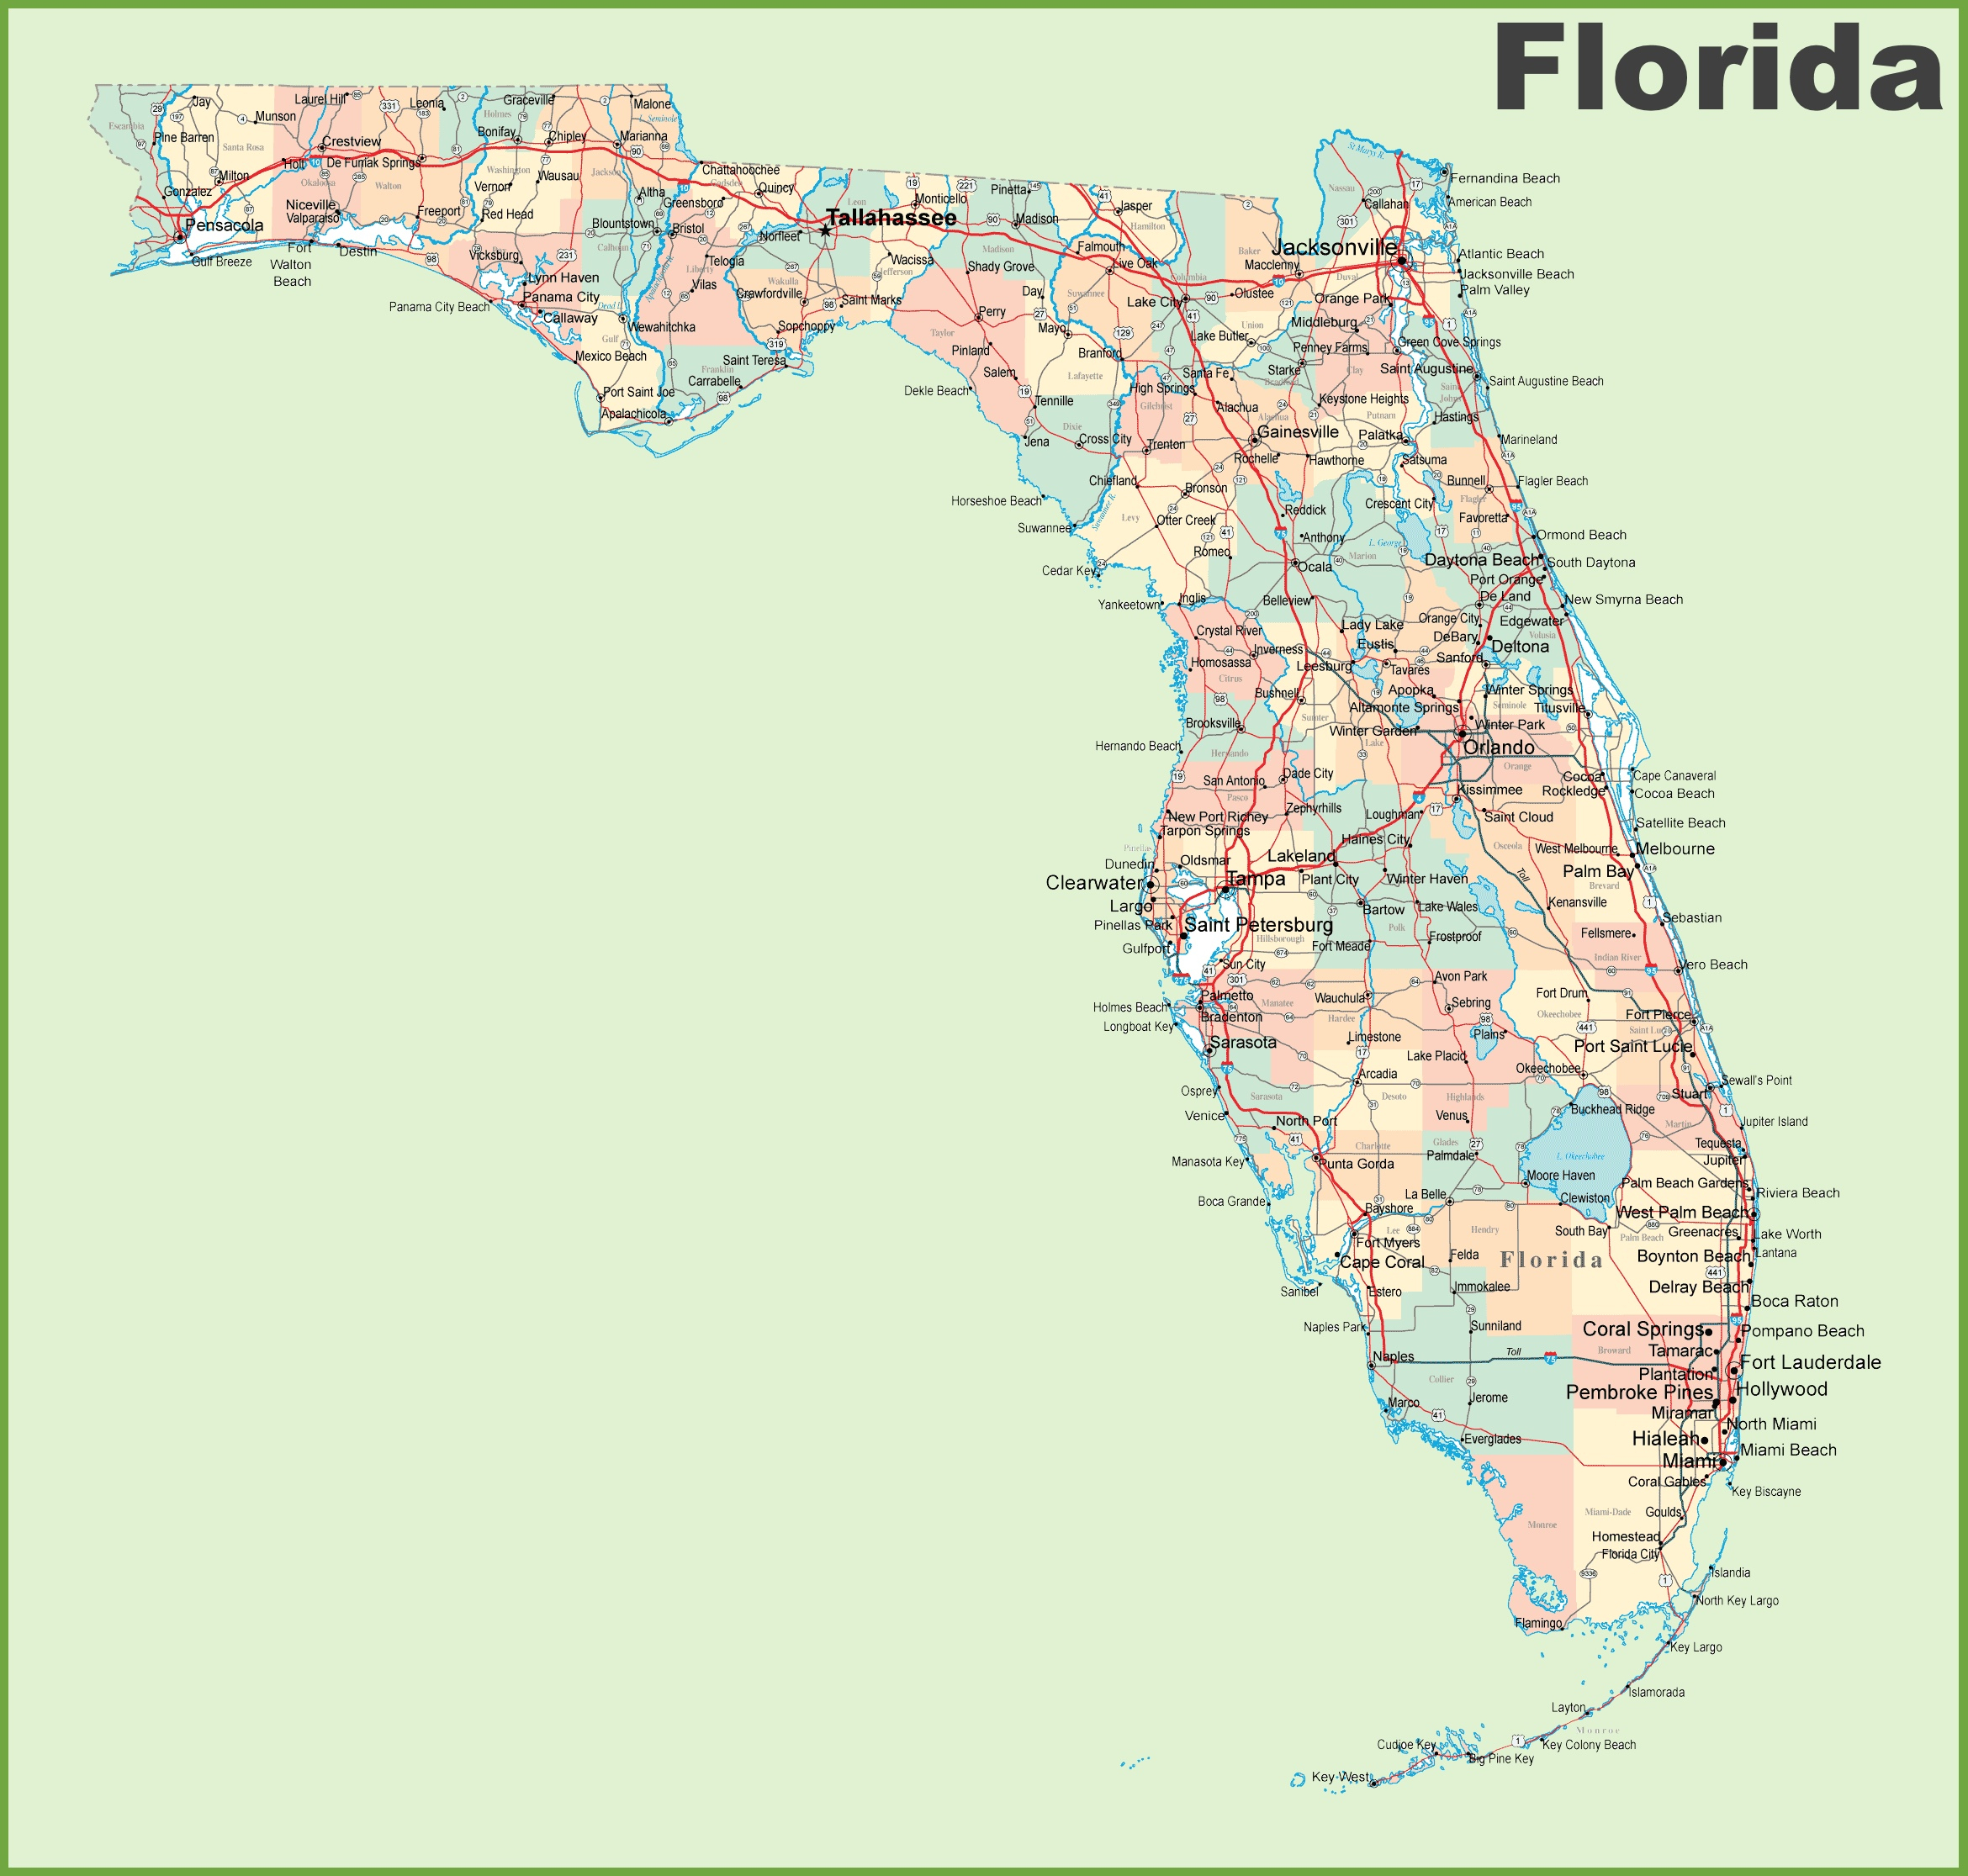 Fla Maps Google And Travel Information | Download Free Fla Maps Google - Google Maps Venice Florida